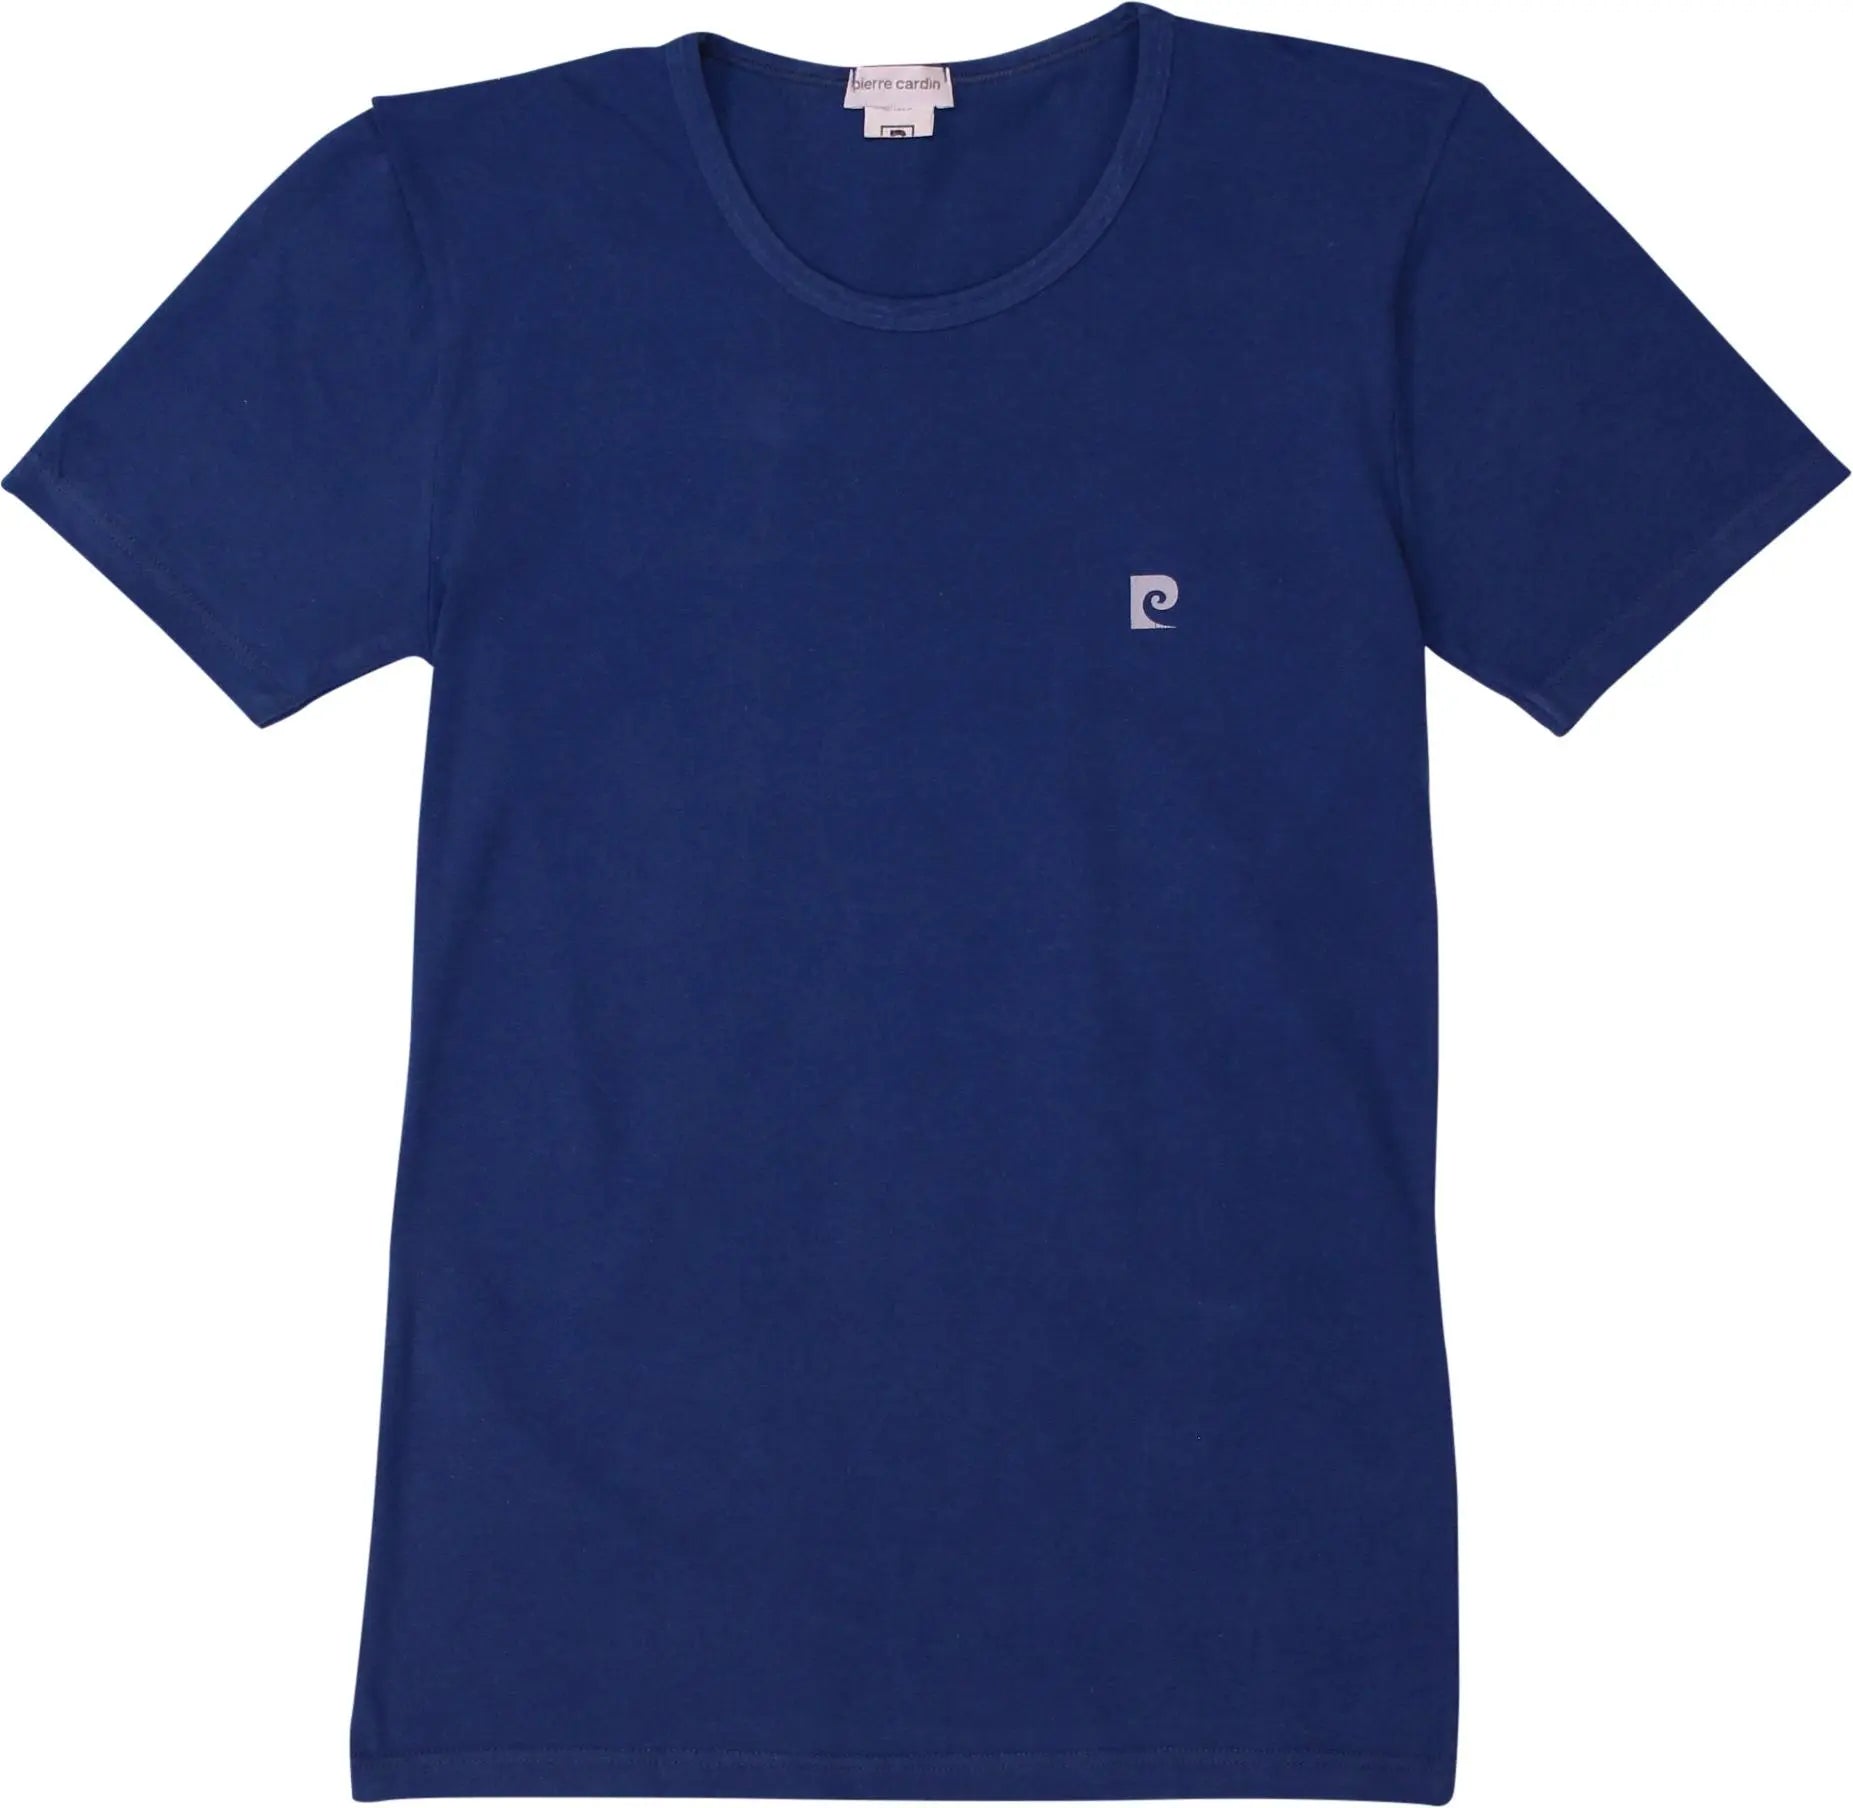 Pierre Cardin - Blue T-shirt by Pierre Cardin- ThriftTale.com - Vintage and second handclothing